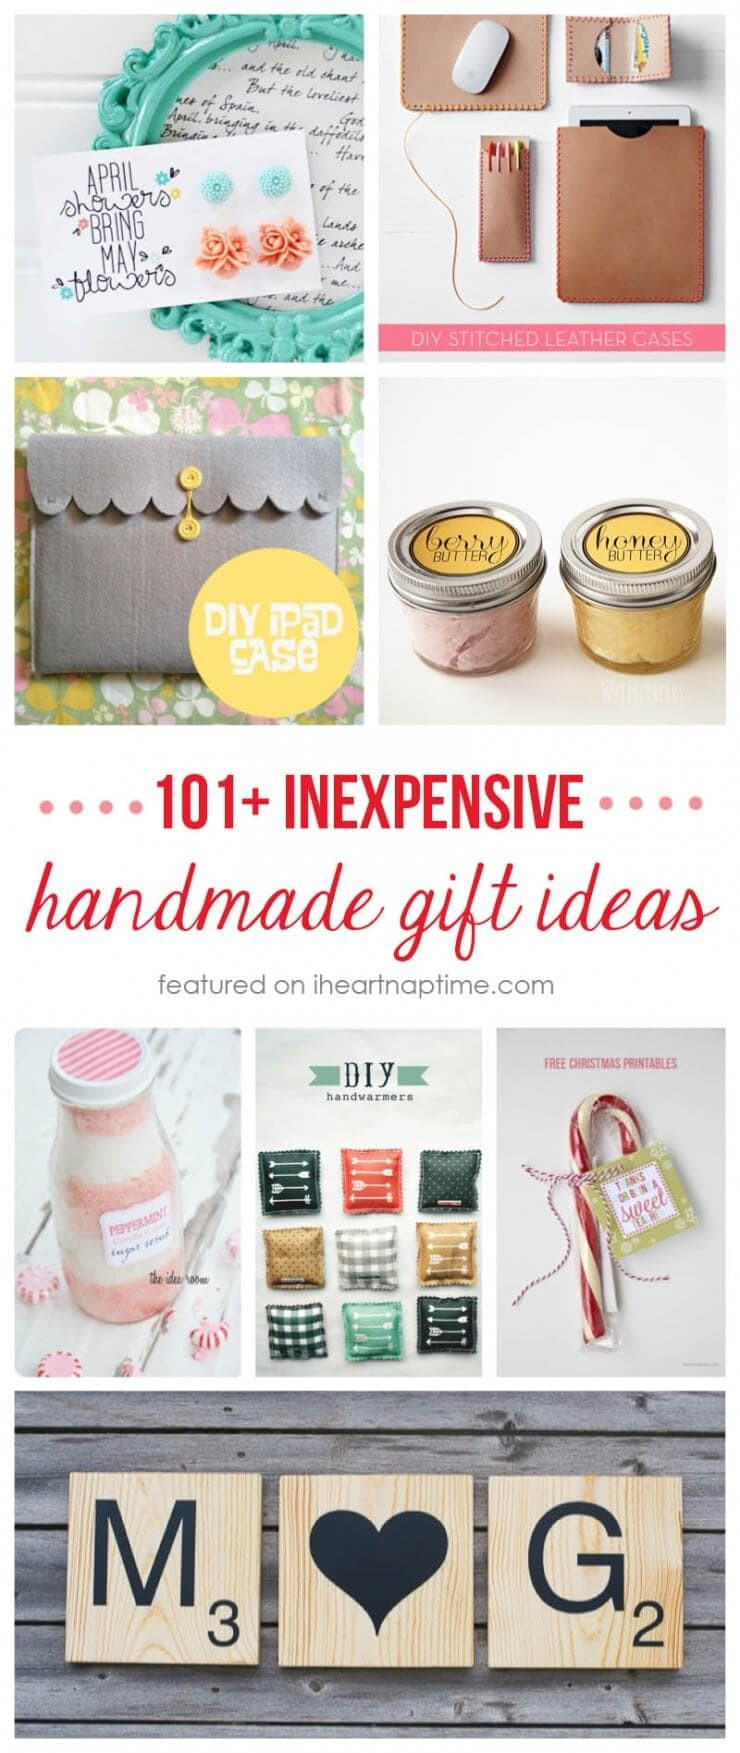 Holiday Cheap Gift Ideas
 50 homemade t ideas to make for under $5 I Heart Nap Time